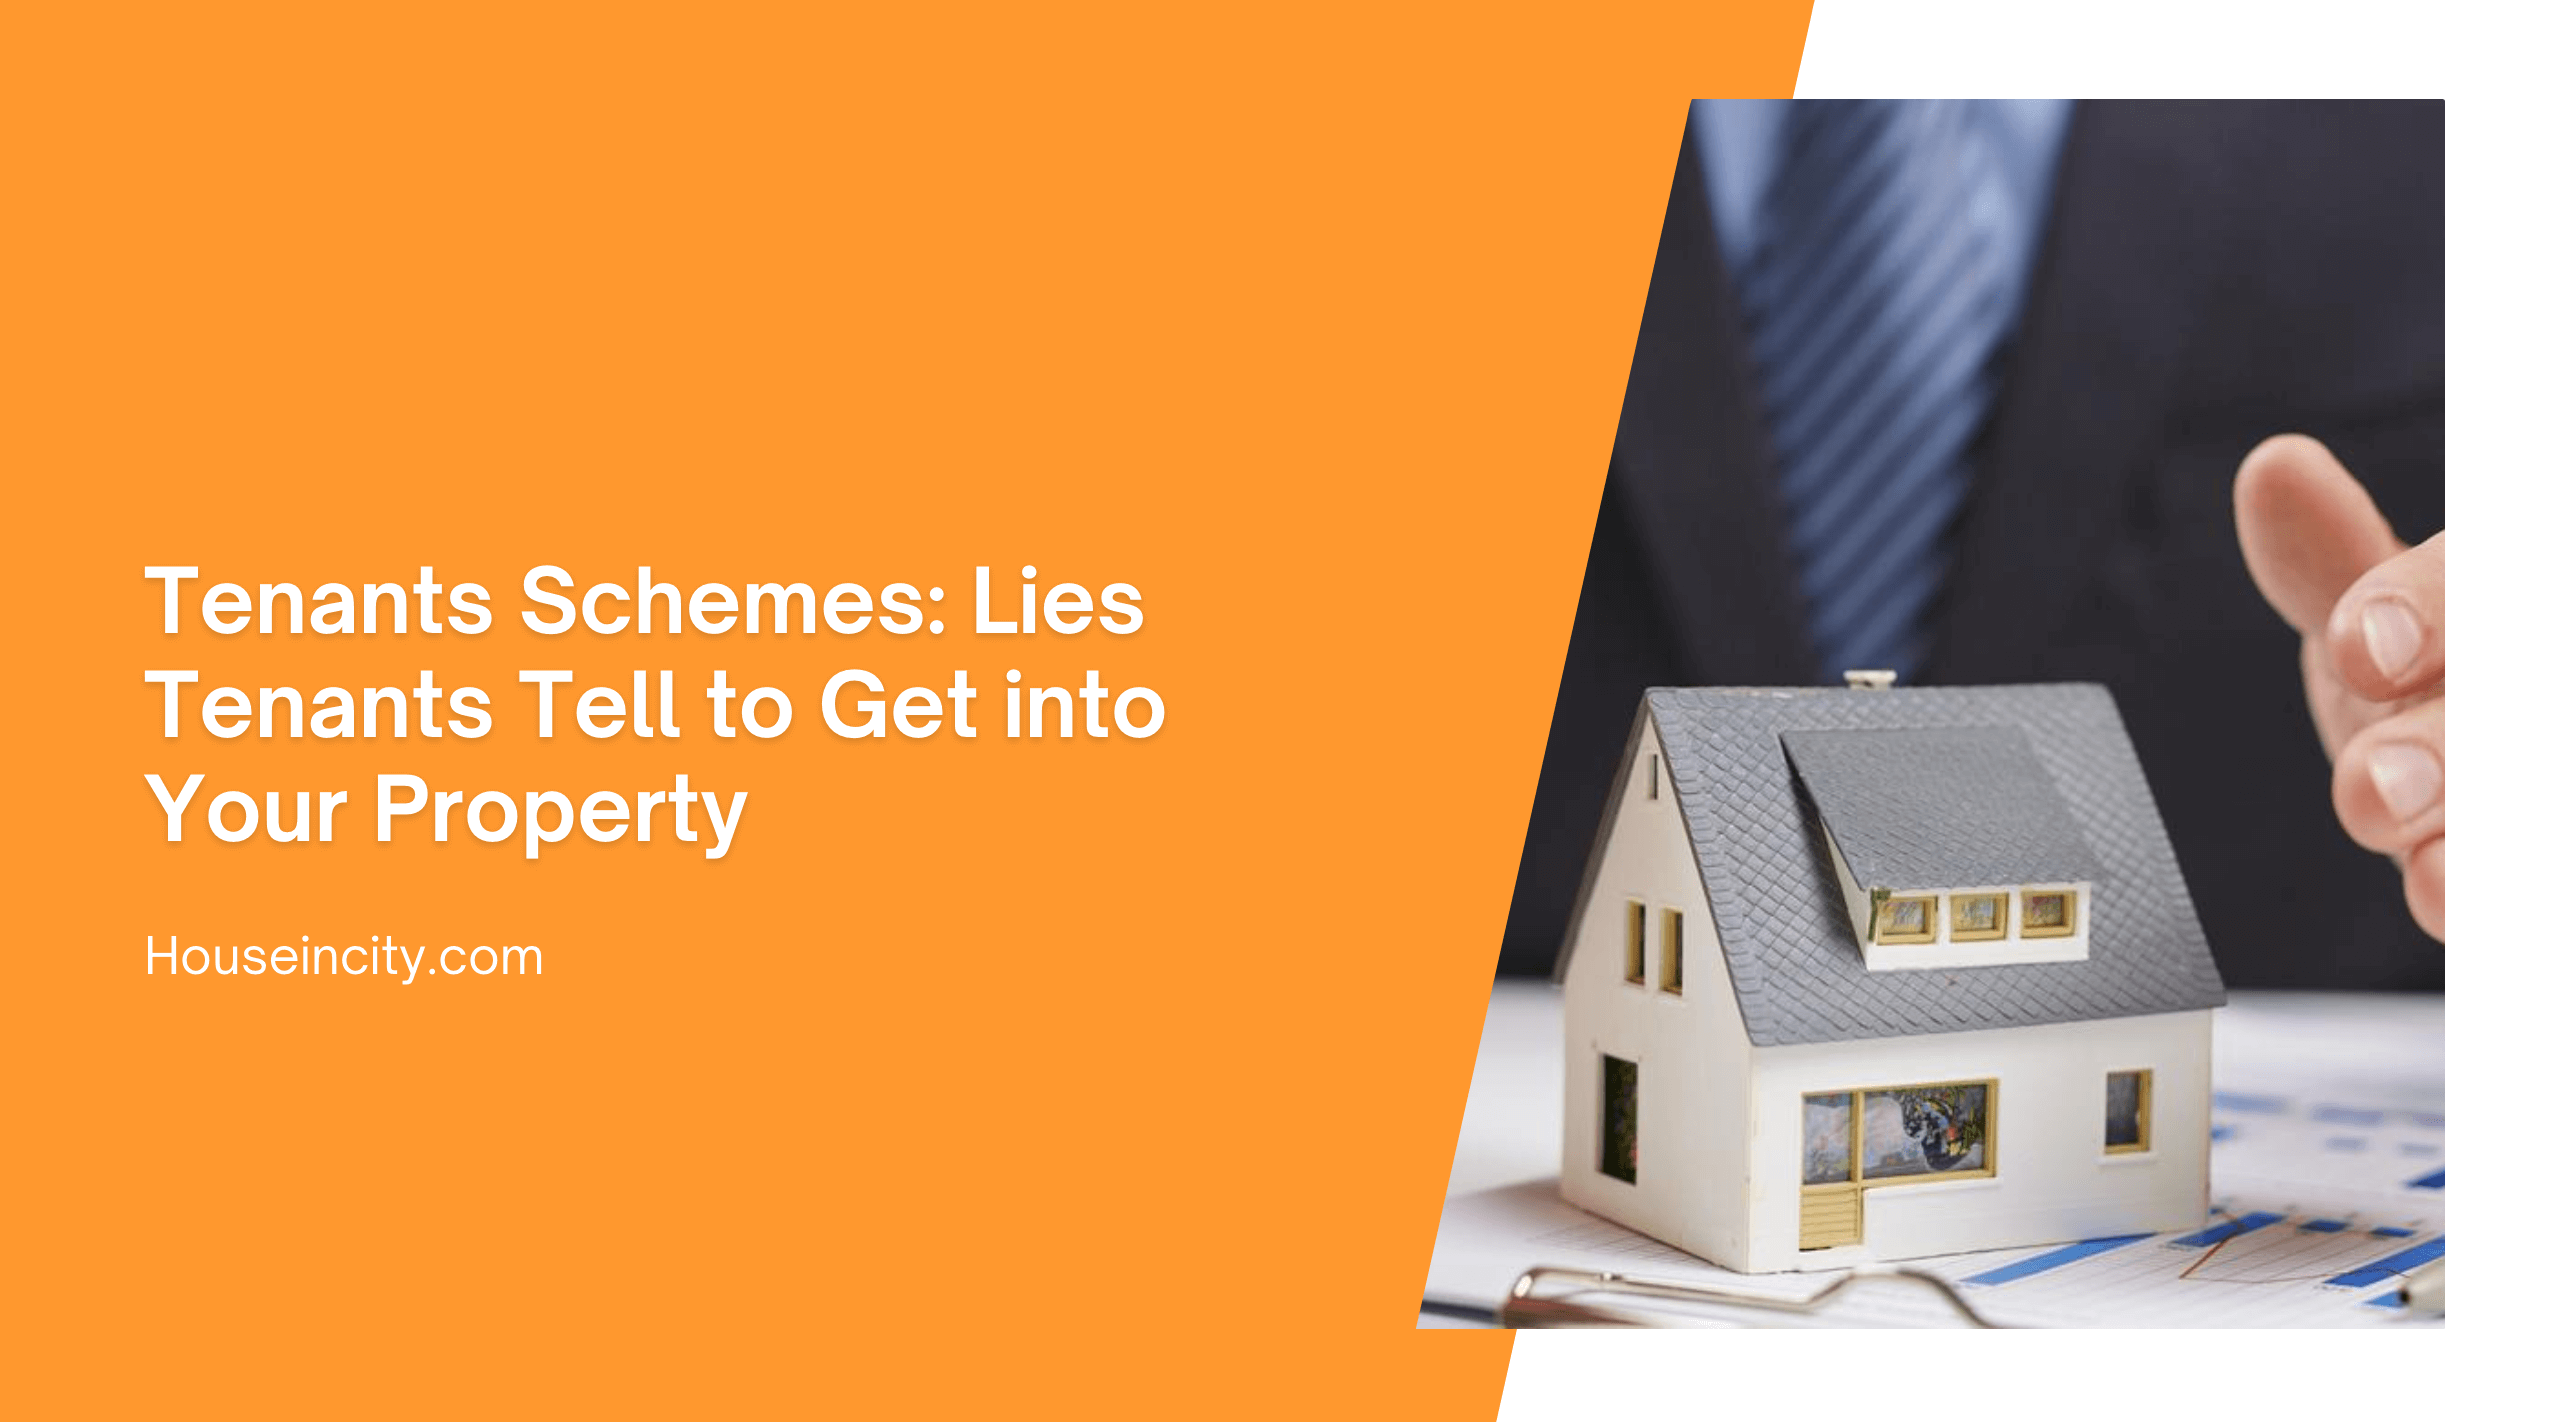 Tenants Schemes: Lies Tenants Tell to Get into Your Property